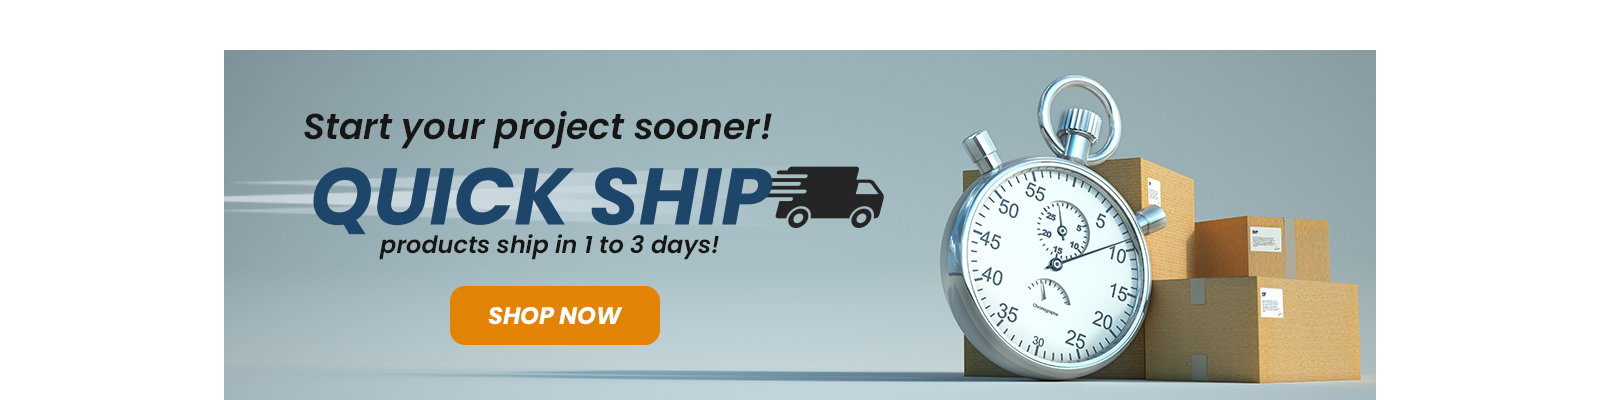 Start your project sooner. Quick Ship products shp in one to three days. Shop Now